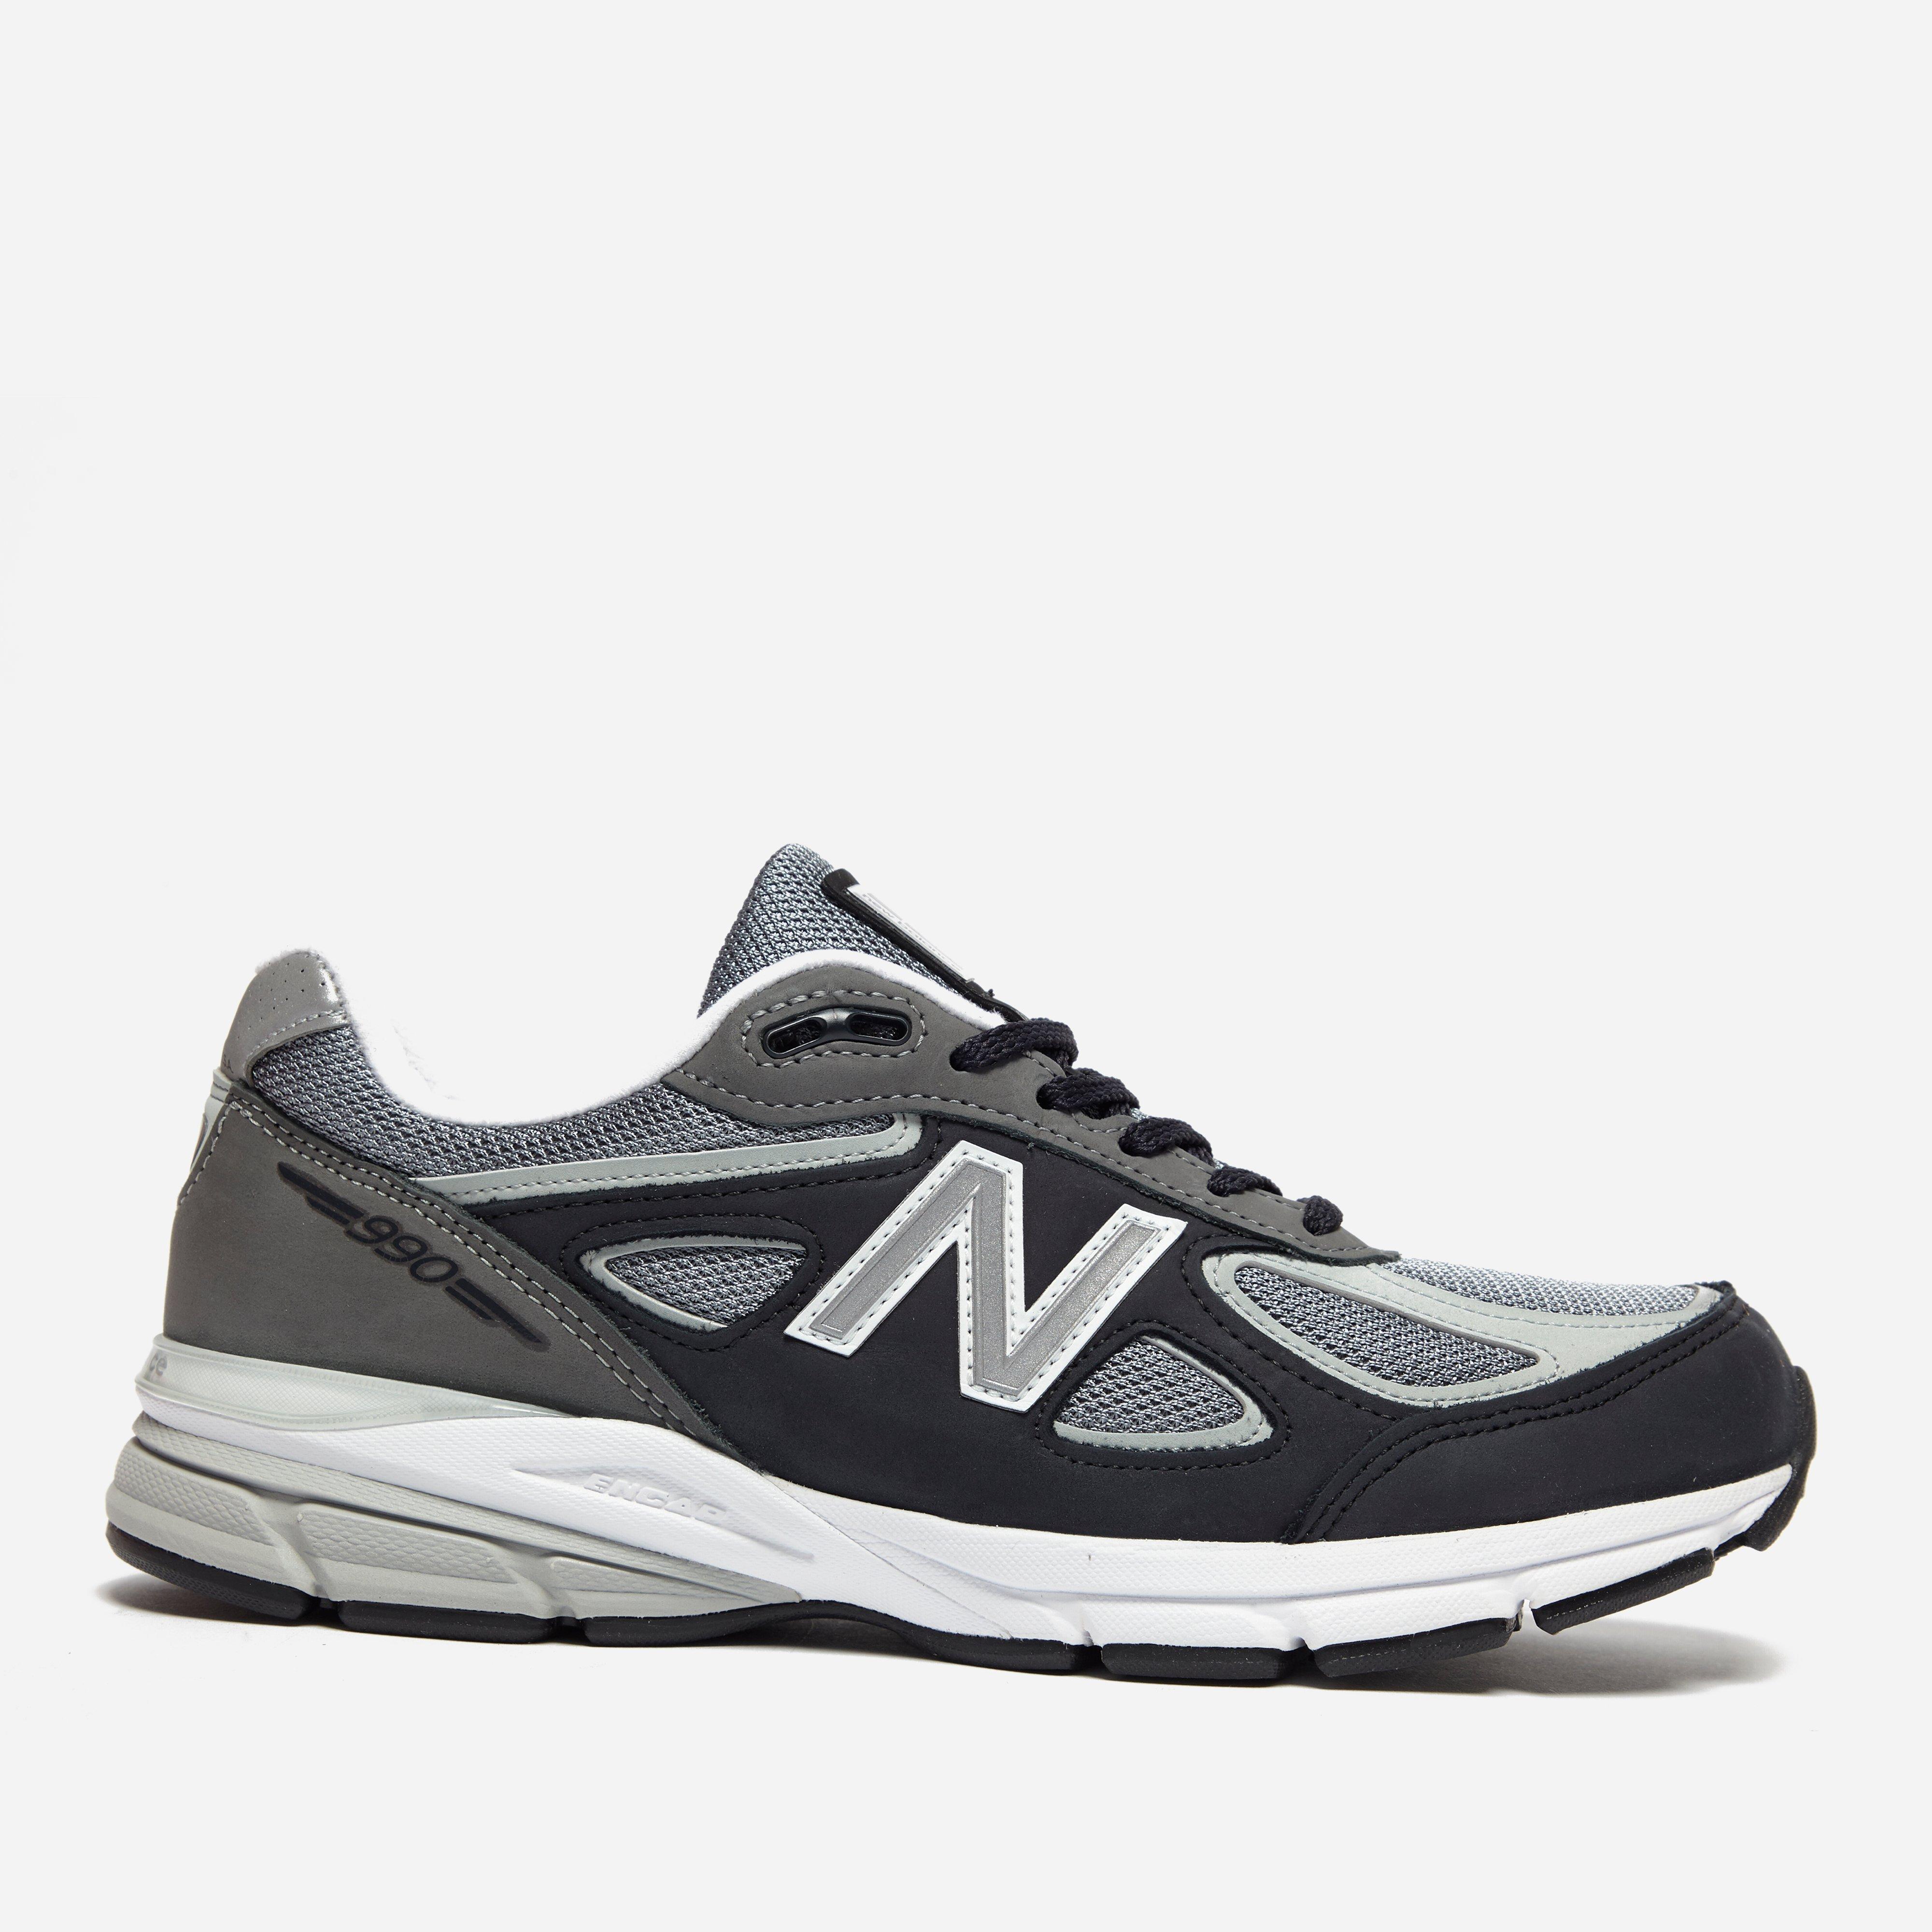 New Balance Leather M 990 Xg4 in Grey (Gray) for Men - Lyst